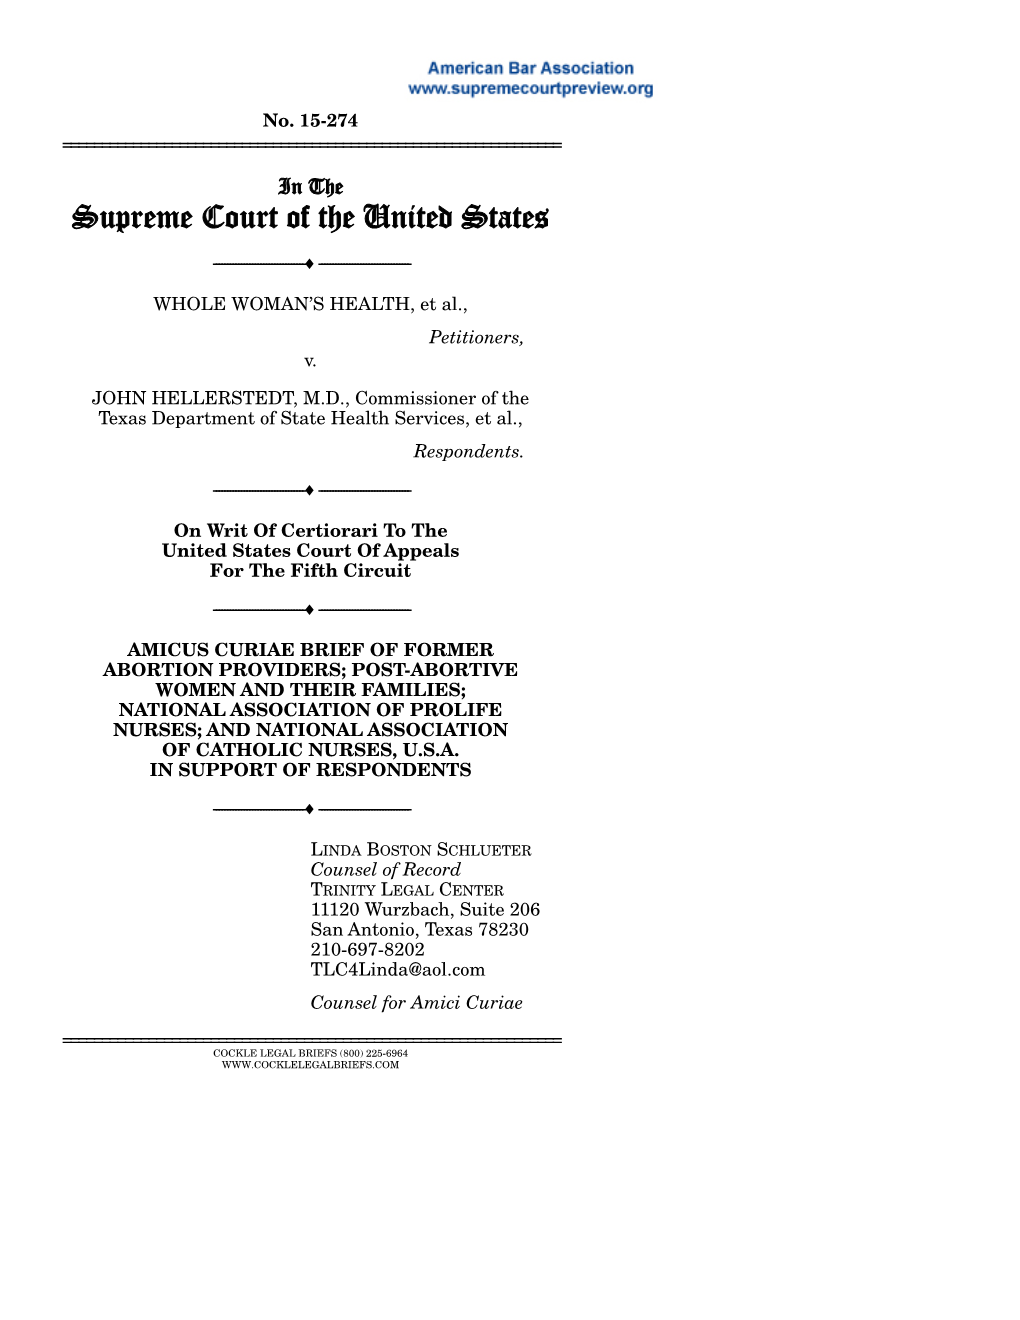 Amicus Curiae Brief of Former Abortion Providers